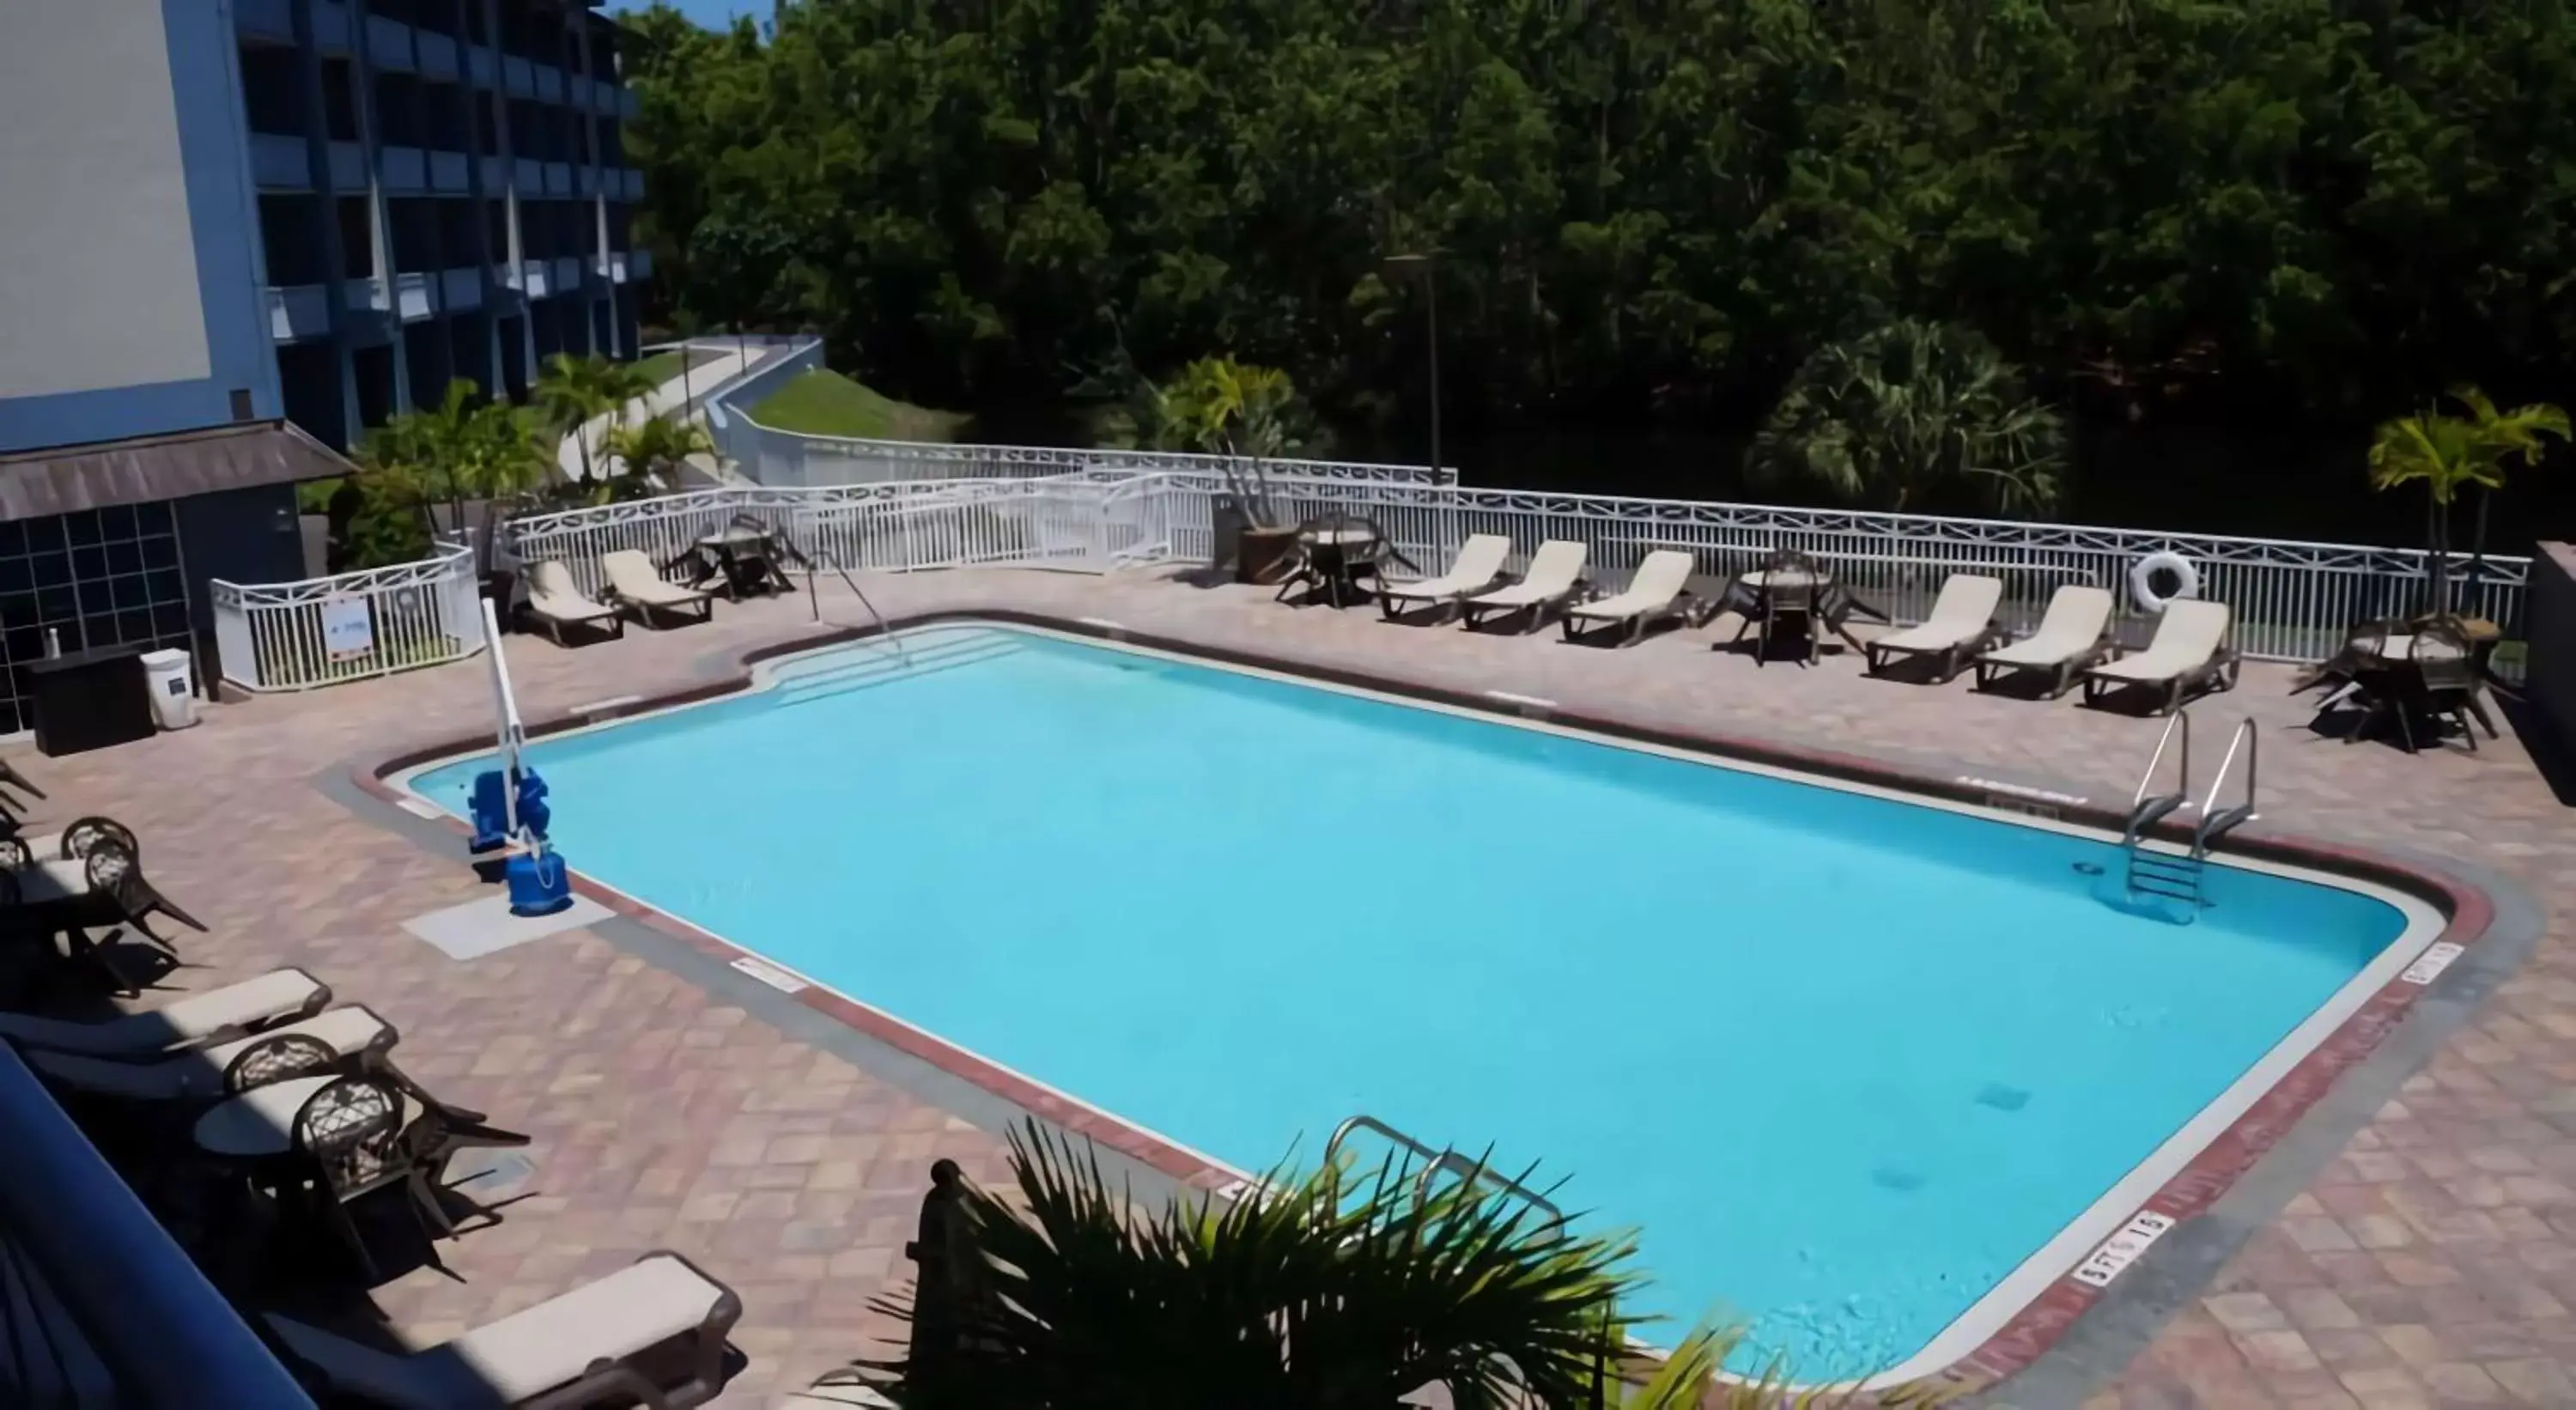 On site, Pool View in Best Western Naples Plaza Hotel